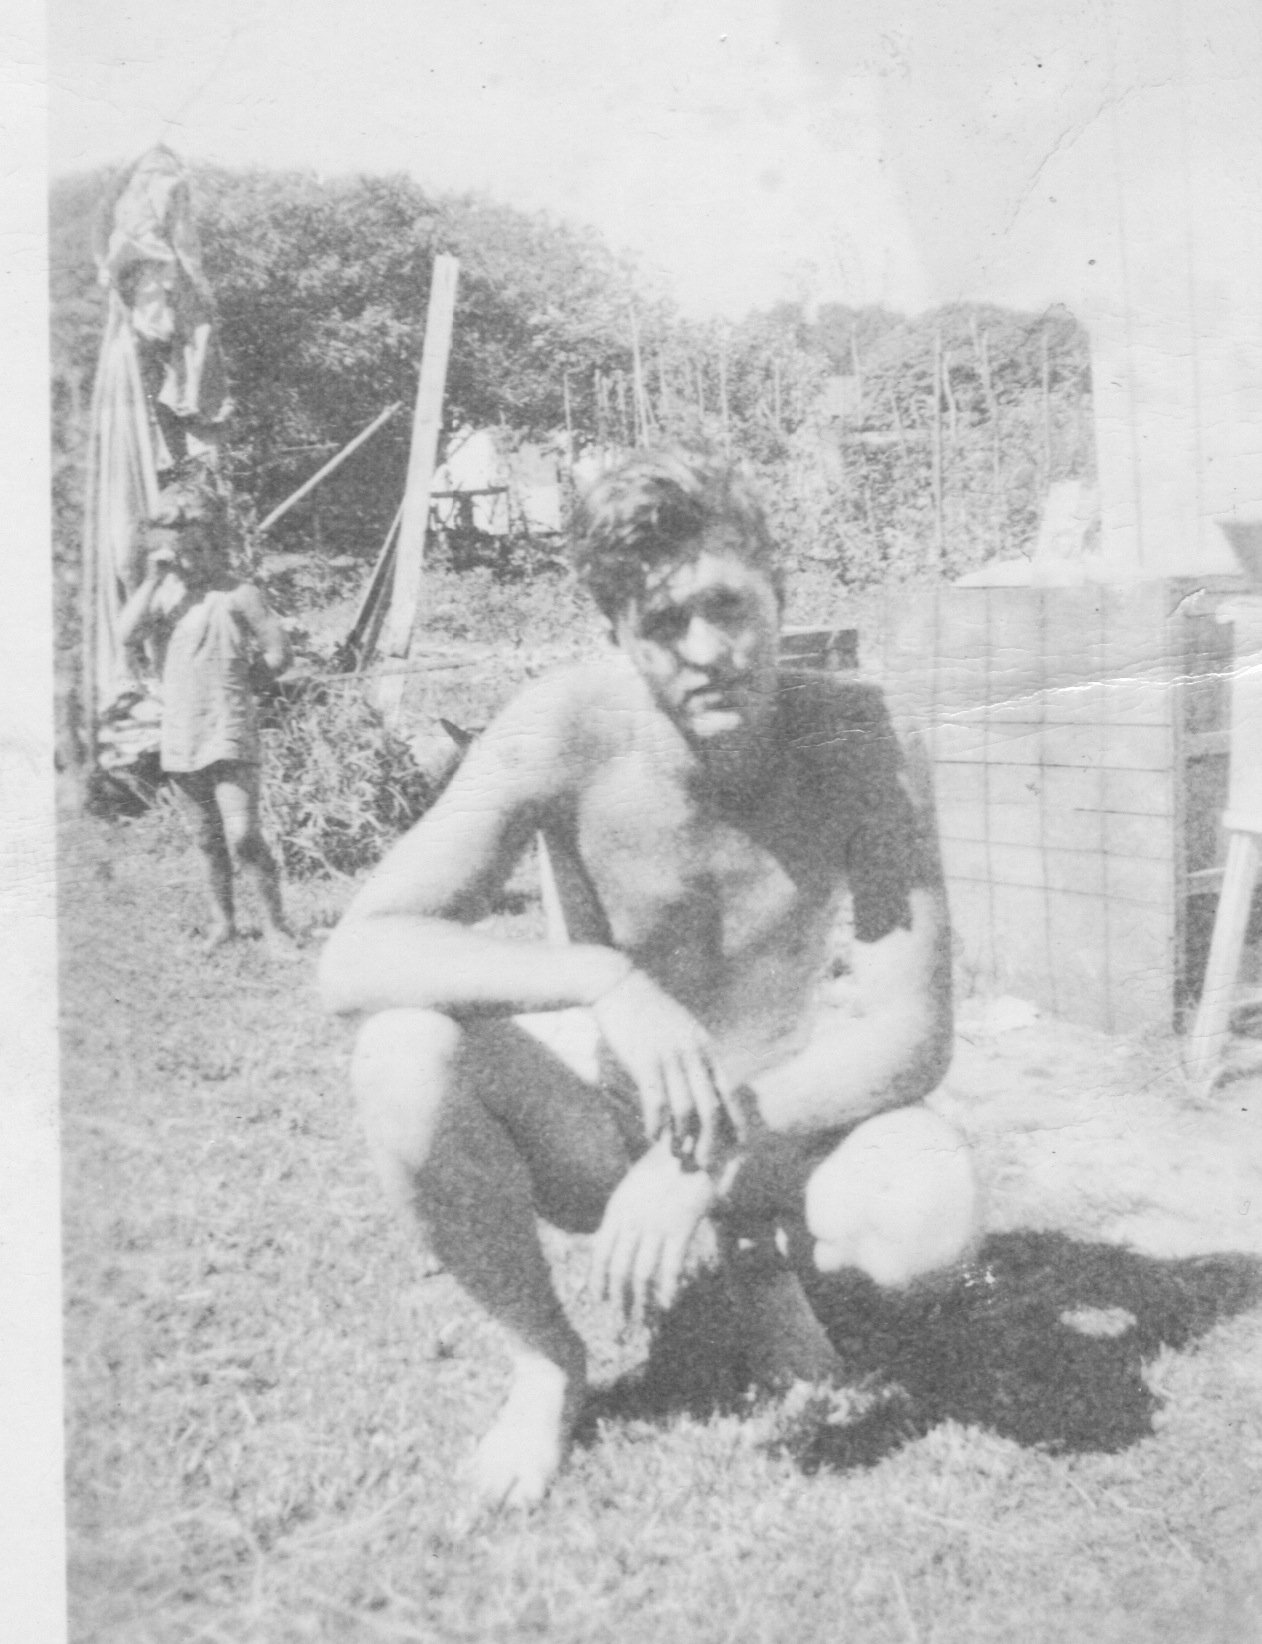 Donald Gray Guthrie in his early 20s in the back yard at 1210 Shackleford .Bobbie Dawn is crying for getting into trouble